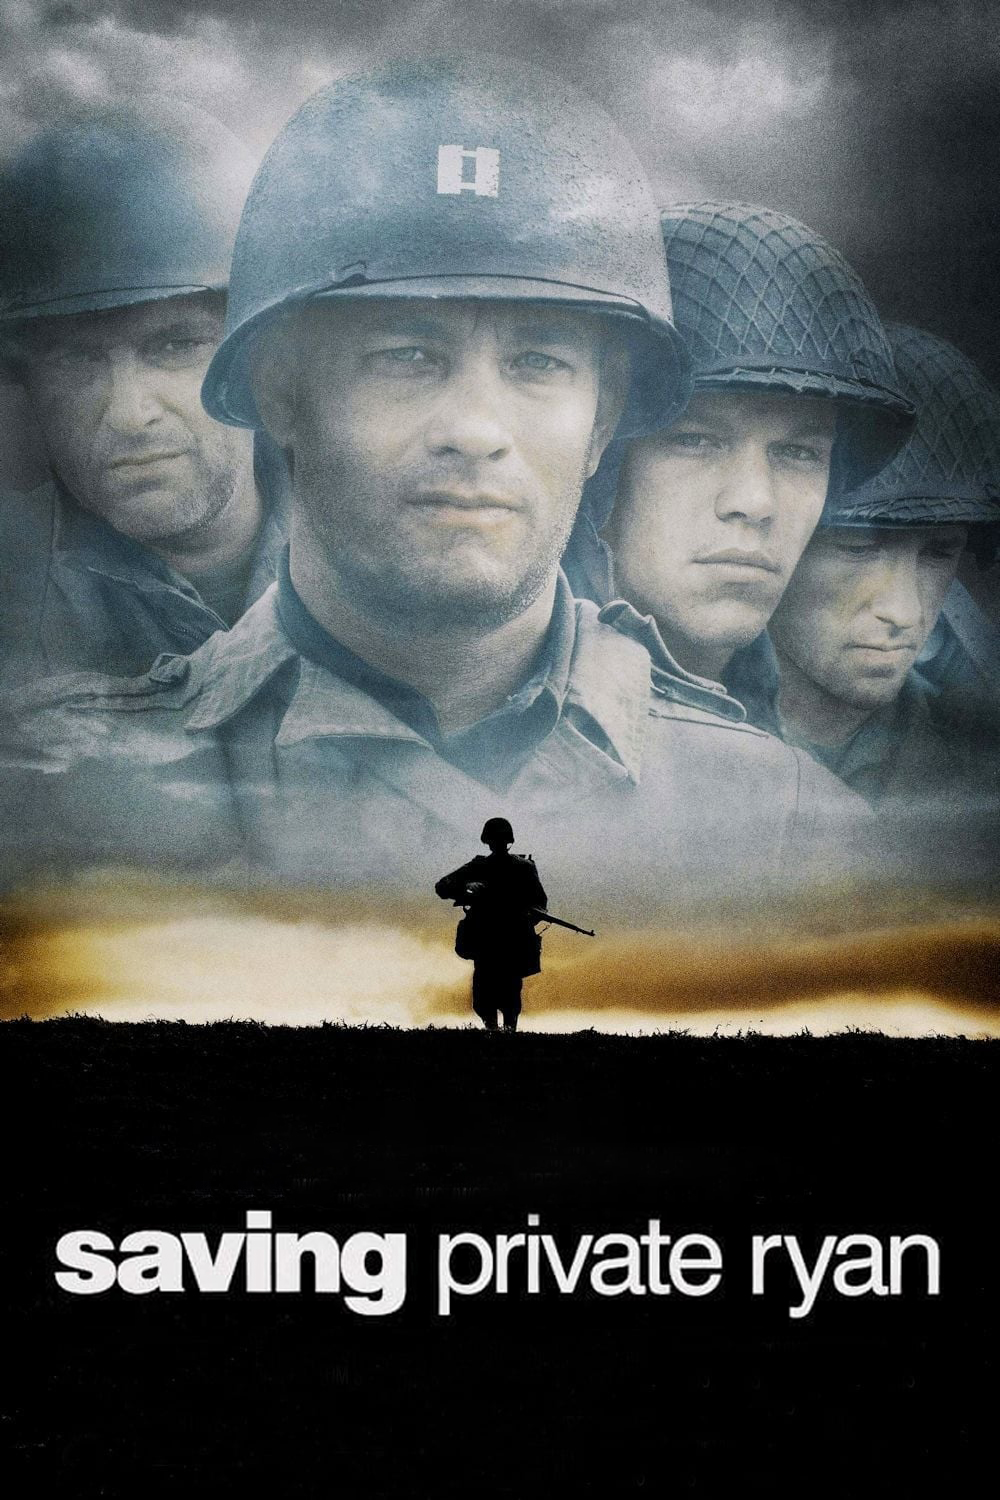 Best war movies to watch on Amazon or iTunes